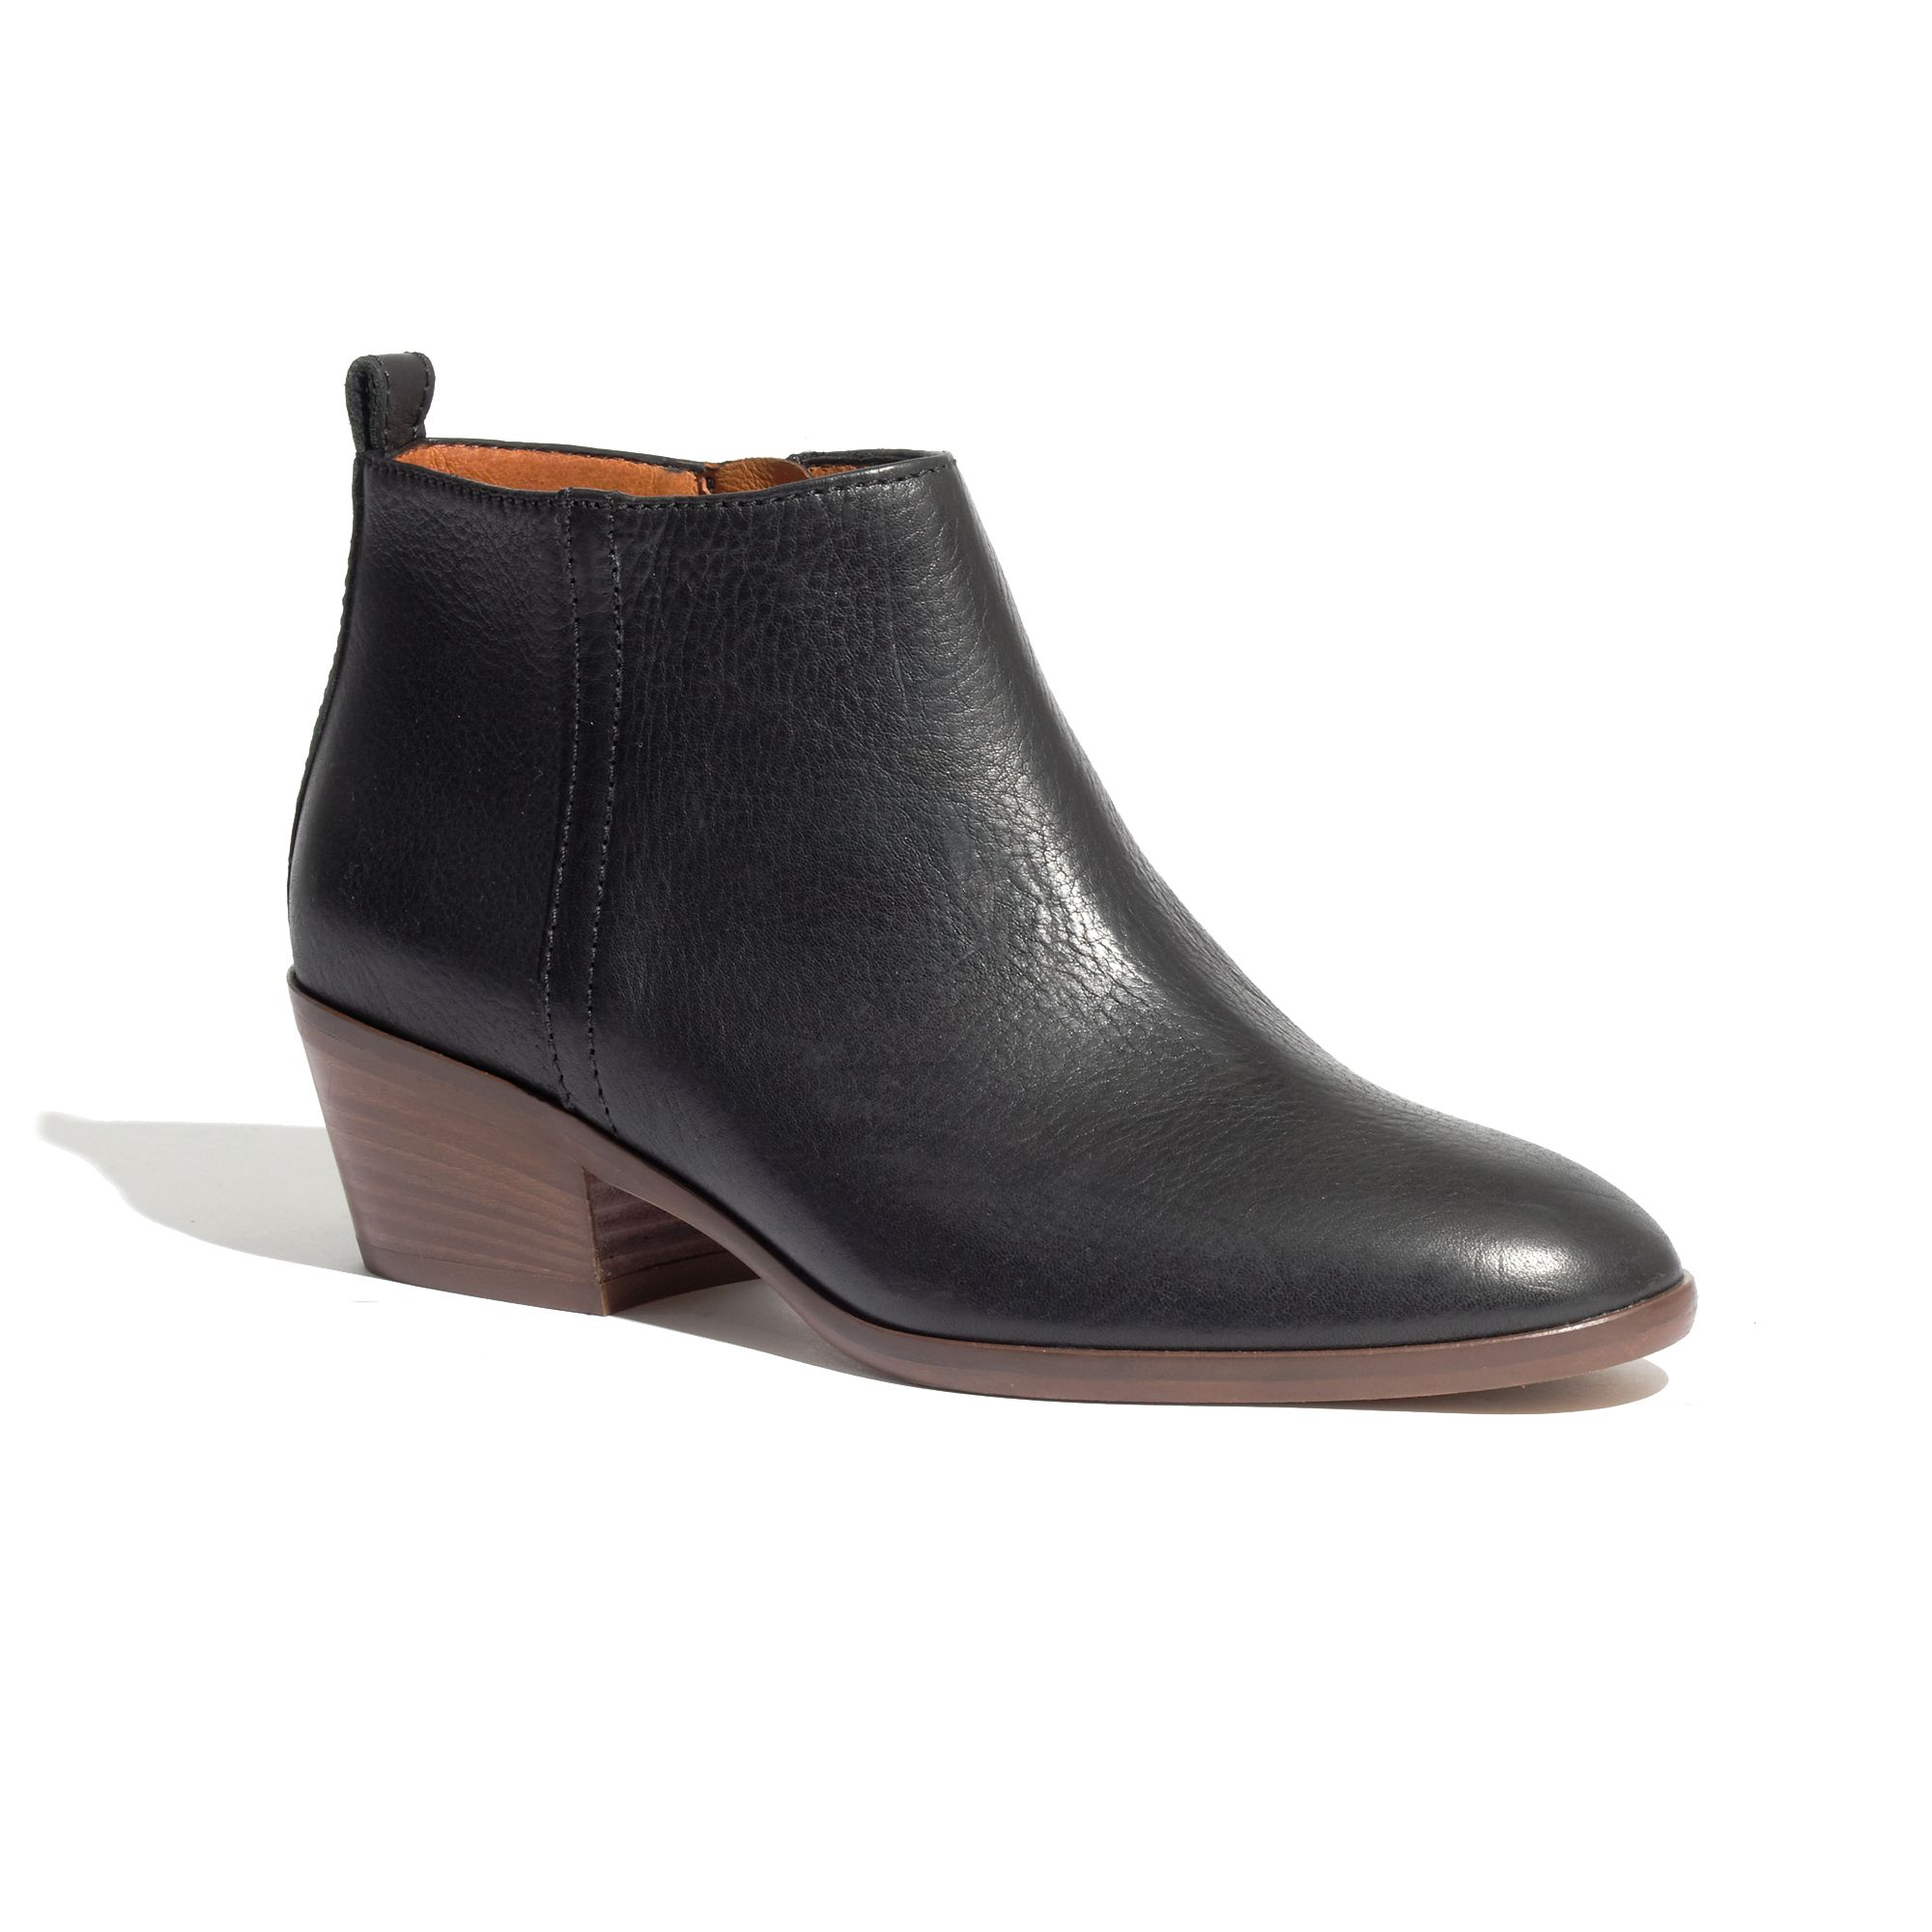 Madewell The Charley Boot in Leather in 